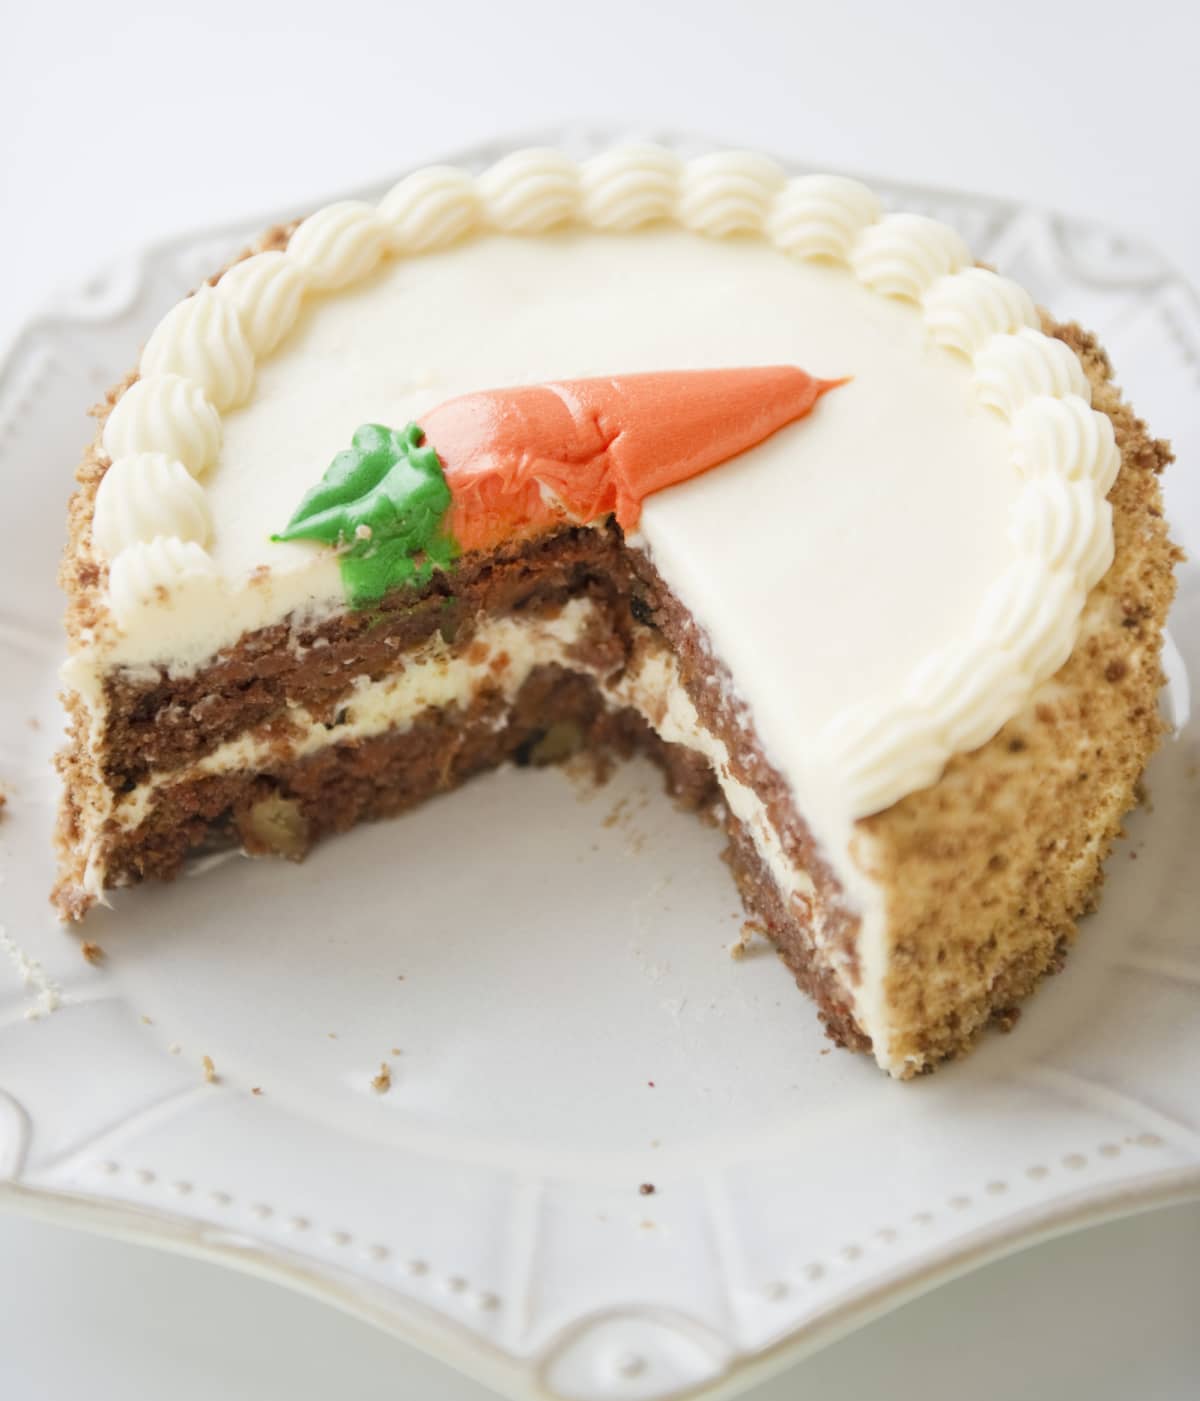 Carrot cake with white frosting